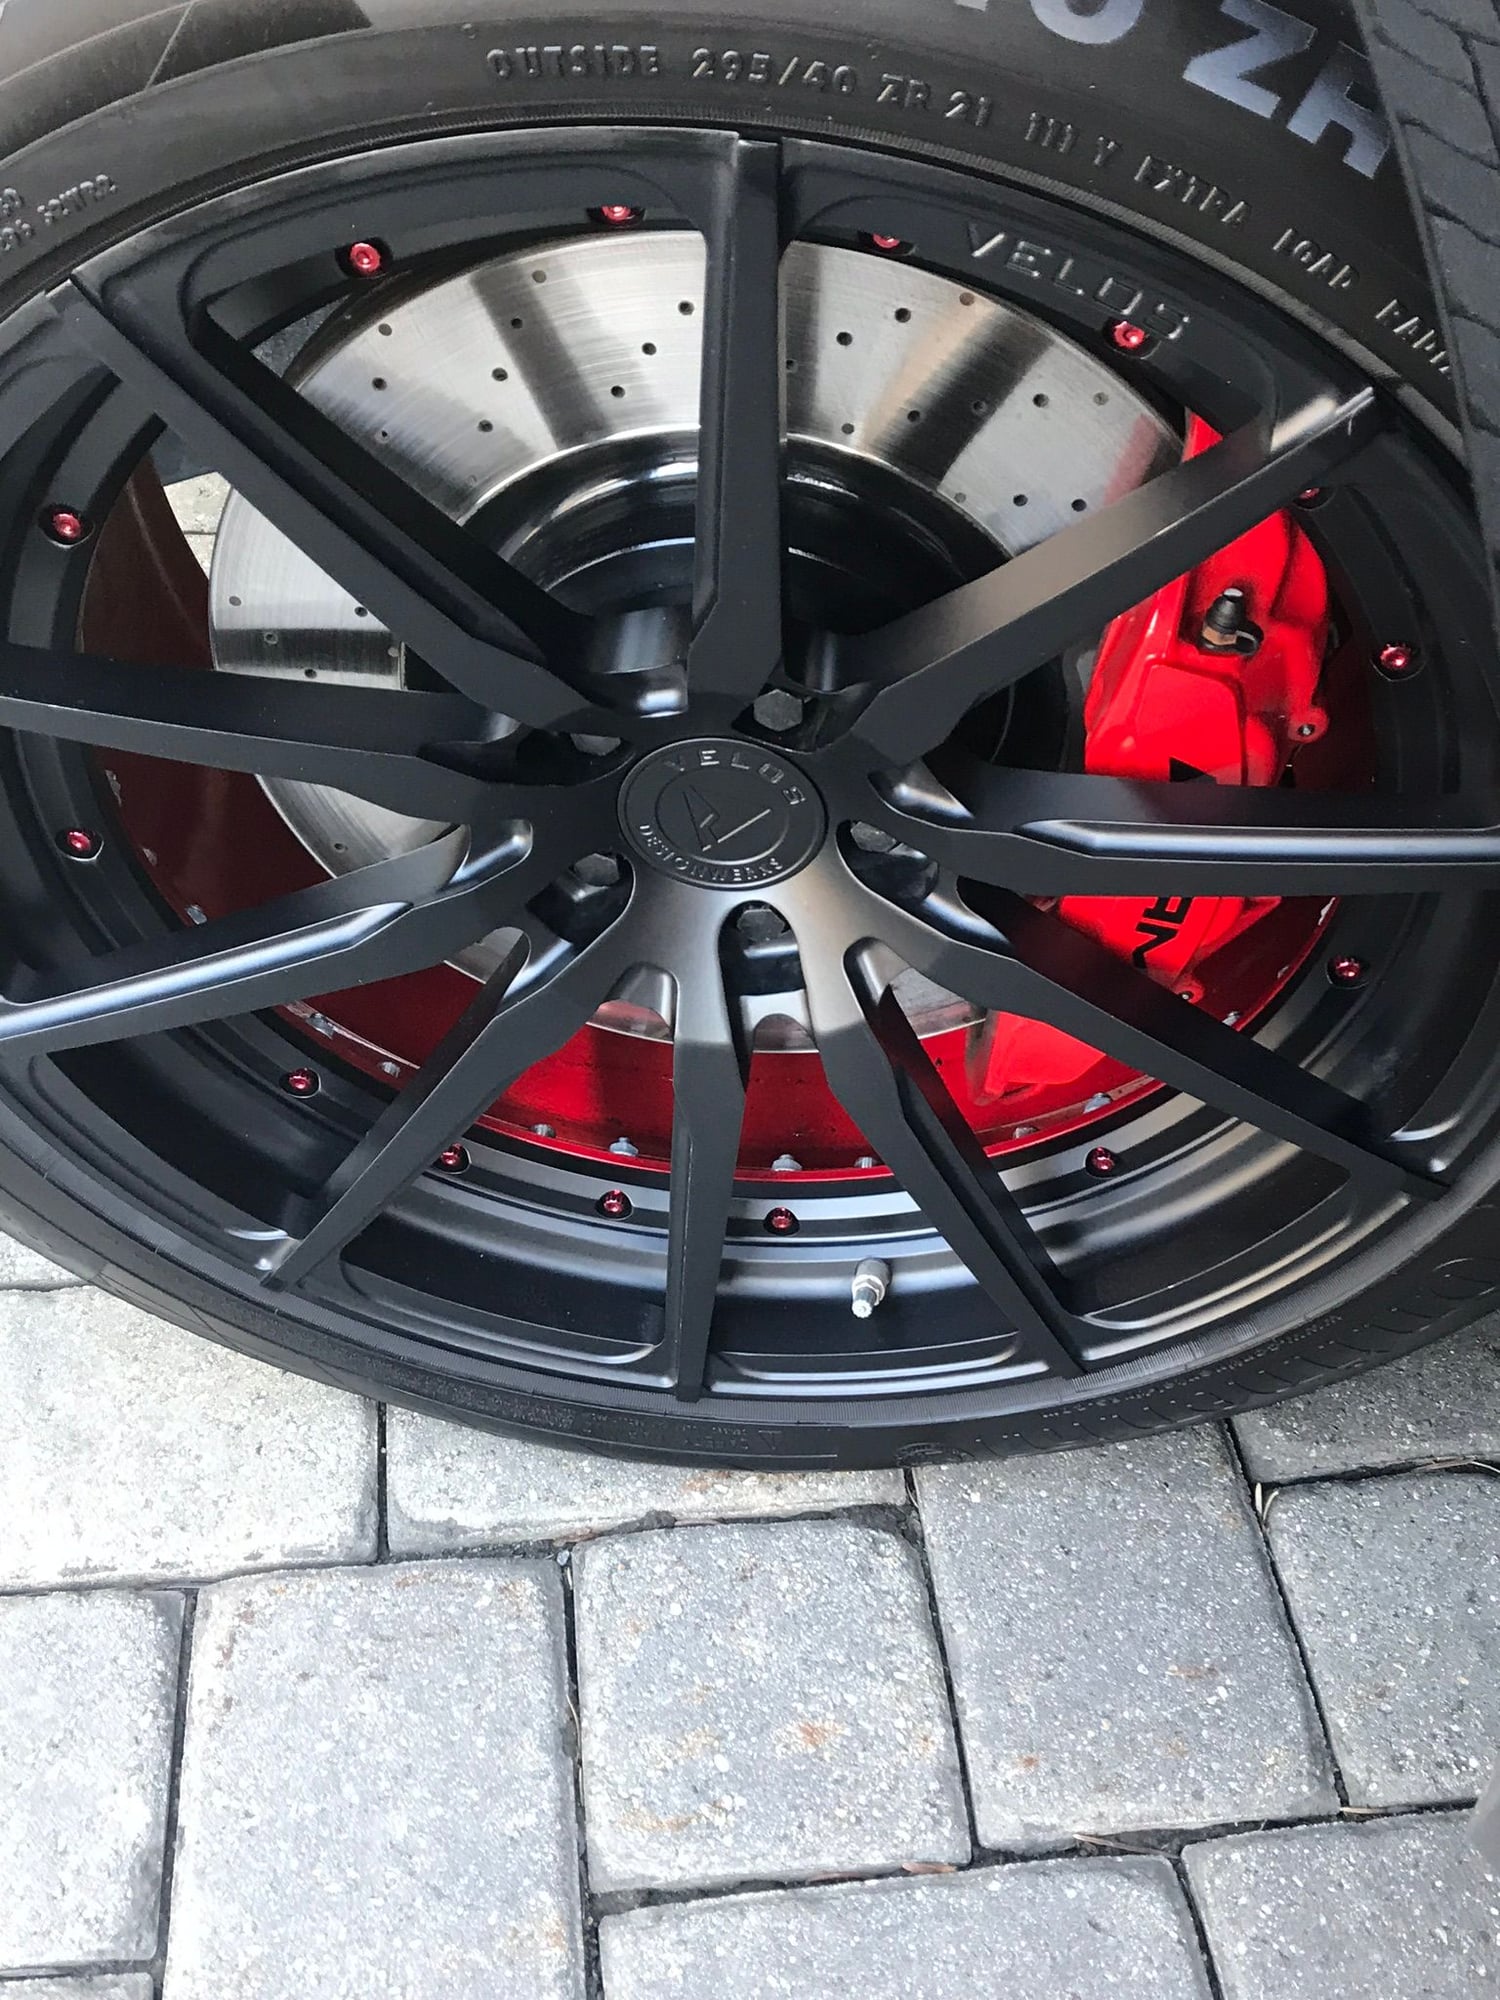 Wheels and Tires/Axles - 21 inch Velos S10 wheels and tire for a GLS 63 satin black - Used - All Years Mercedes-Benz GLS63 AMG - Andover, MA 01810, United States